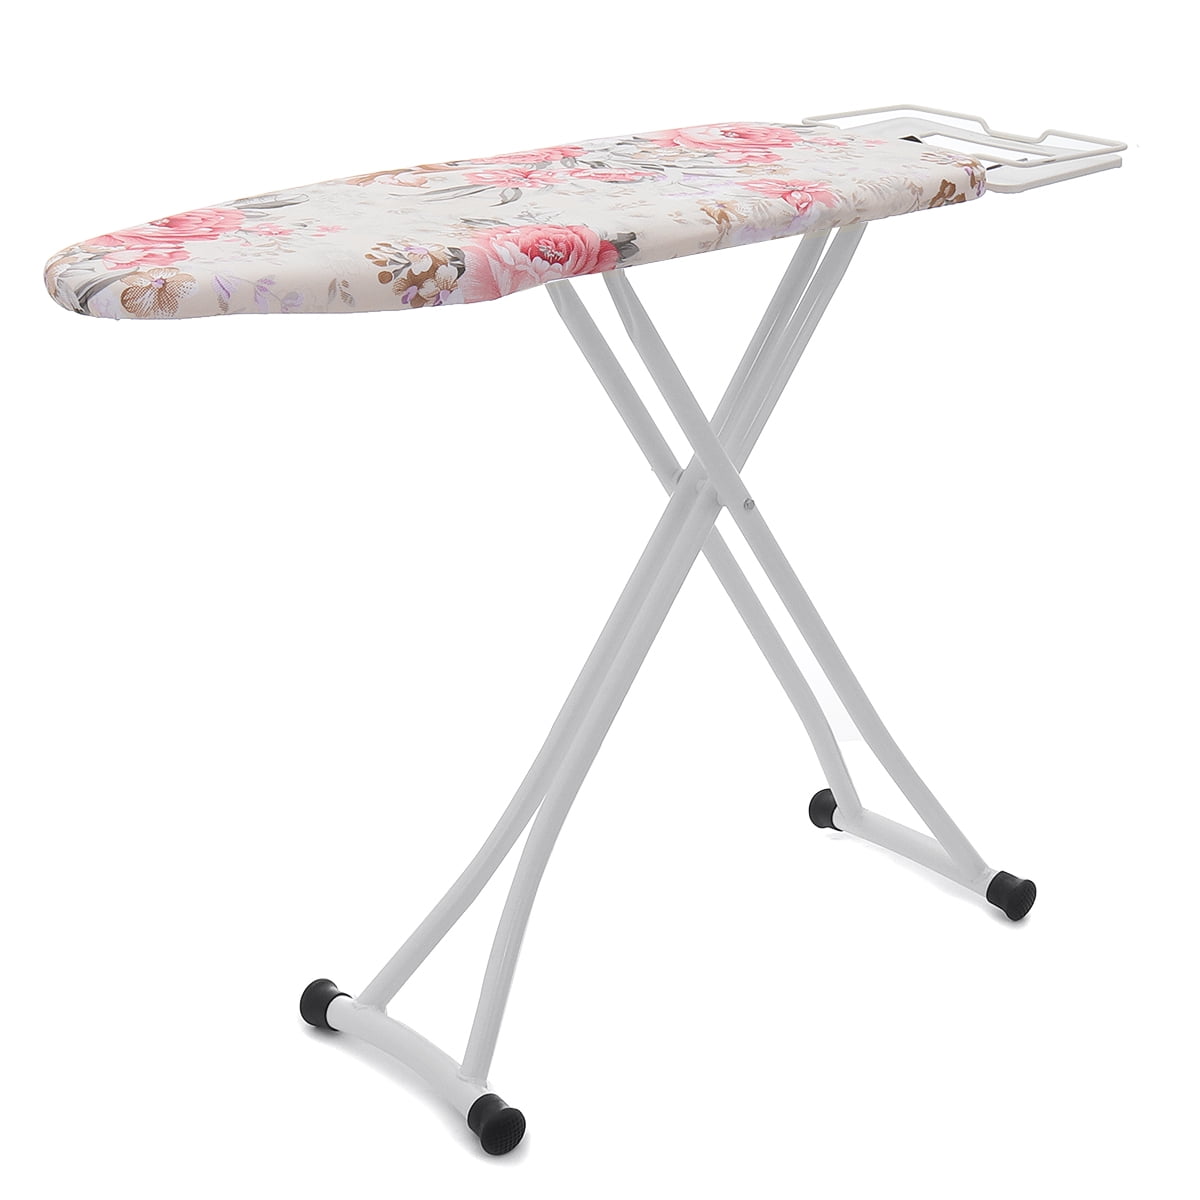 High Quality Ironing Board With Iron Rest Compact Opensize 4-Leg Tabletop Blue 